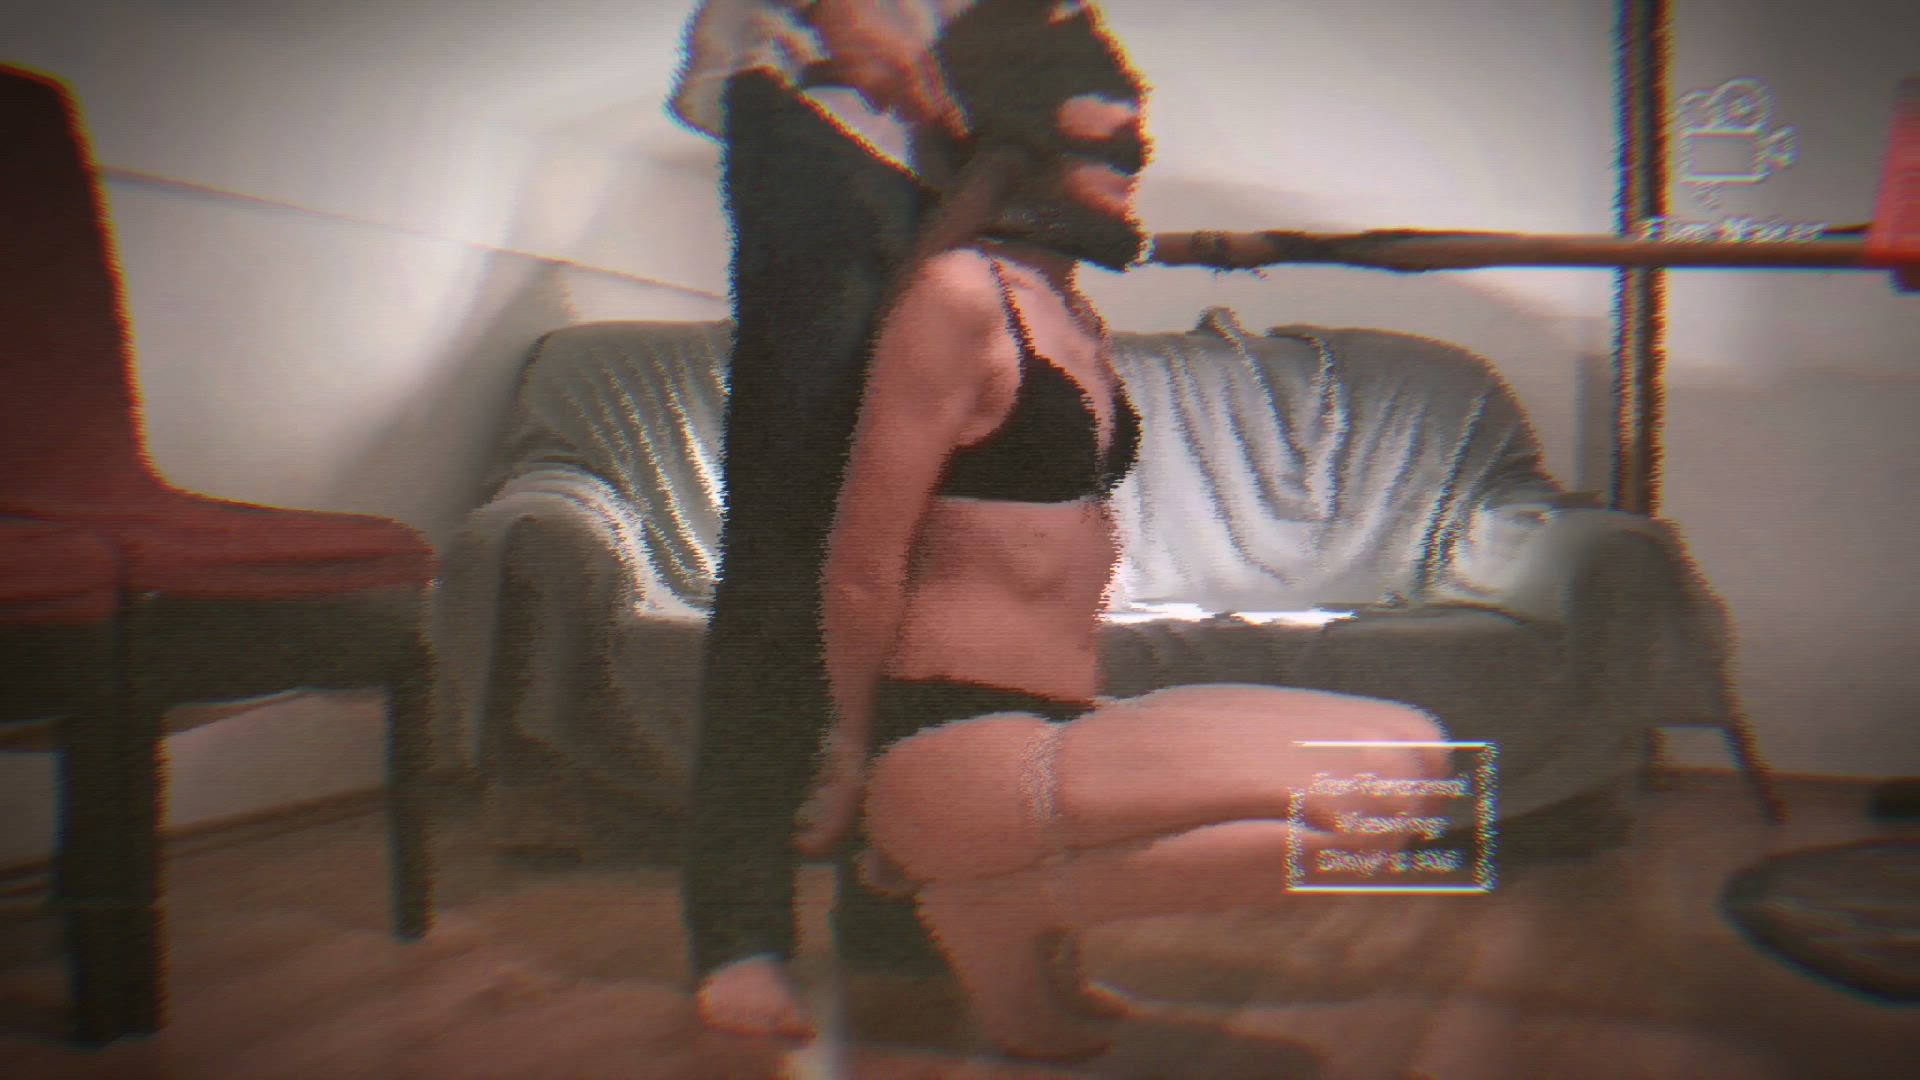 Amateur porn video with onlyfans model aphroditemoor <strong>@aphrodite-apollon</strong>